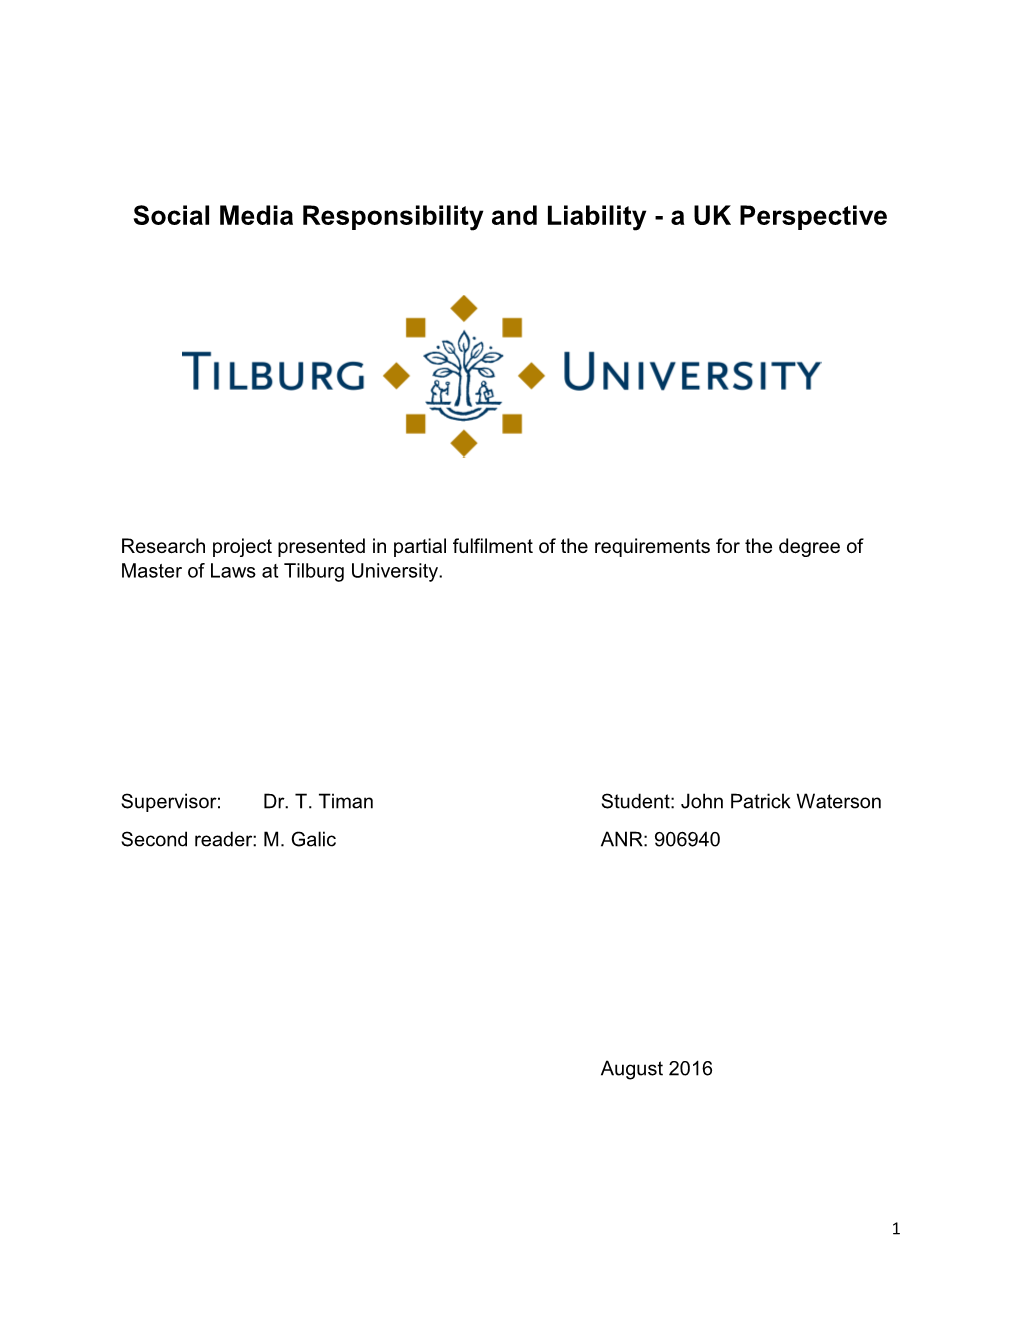 Social Media Responsibility and Liability - a UK Perspective